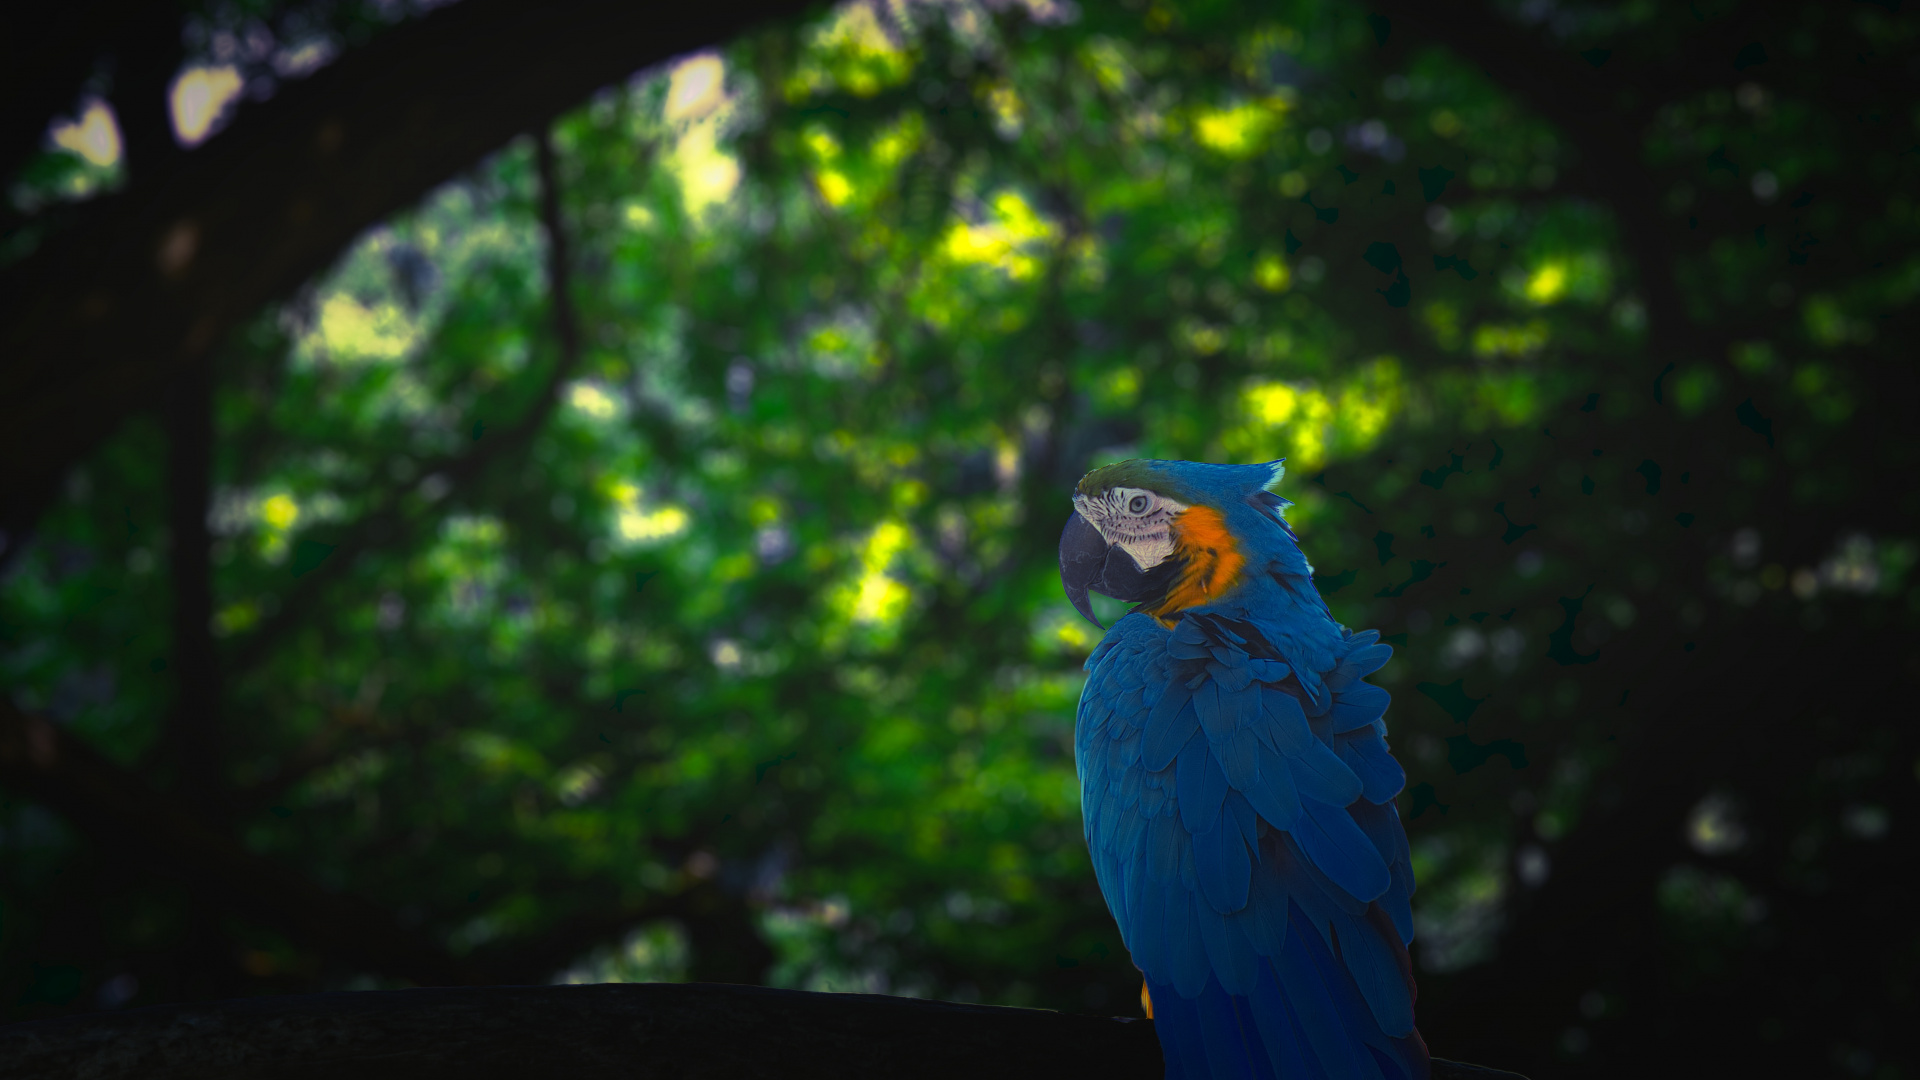 Blue and Yellow Macaw on Black Wooden Fence During Daytime. Wallpaper in 1920x1080 Resolution